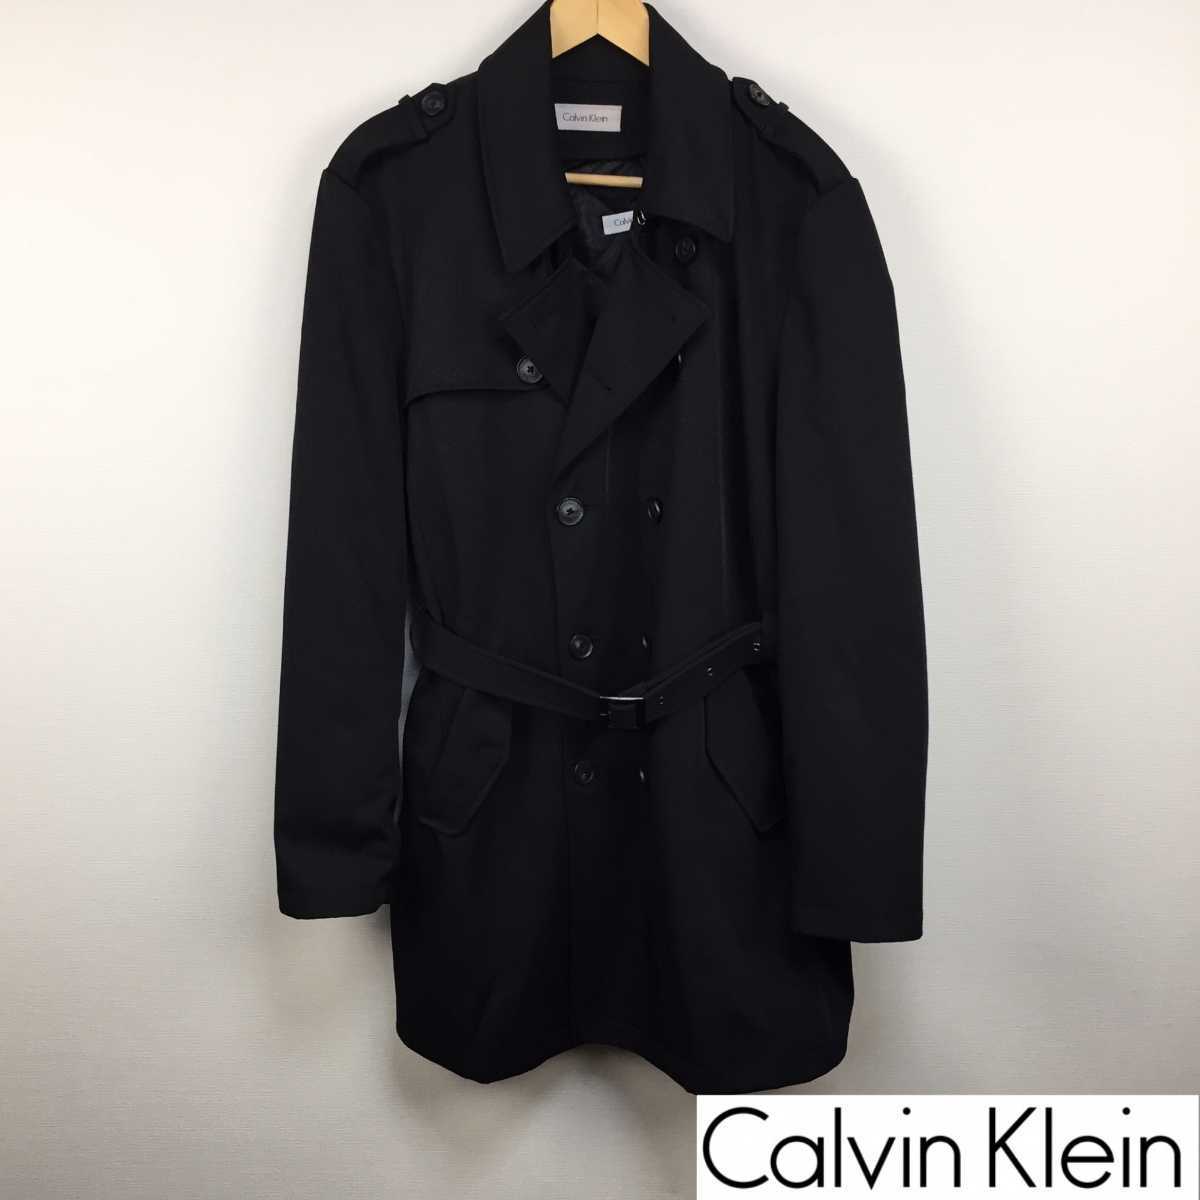  beautiful goods Calvin Klein trench coat black size 42 goods can be returned talent free shipping 